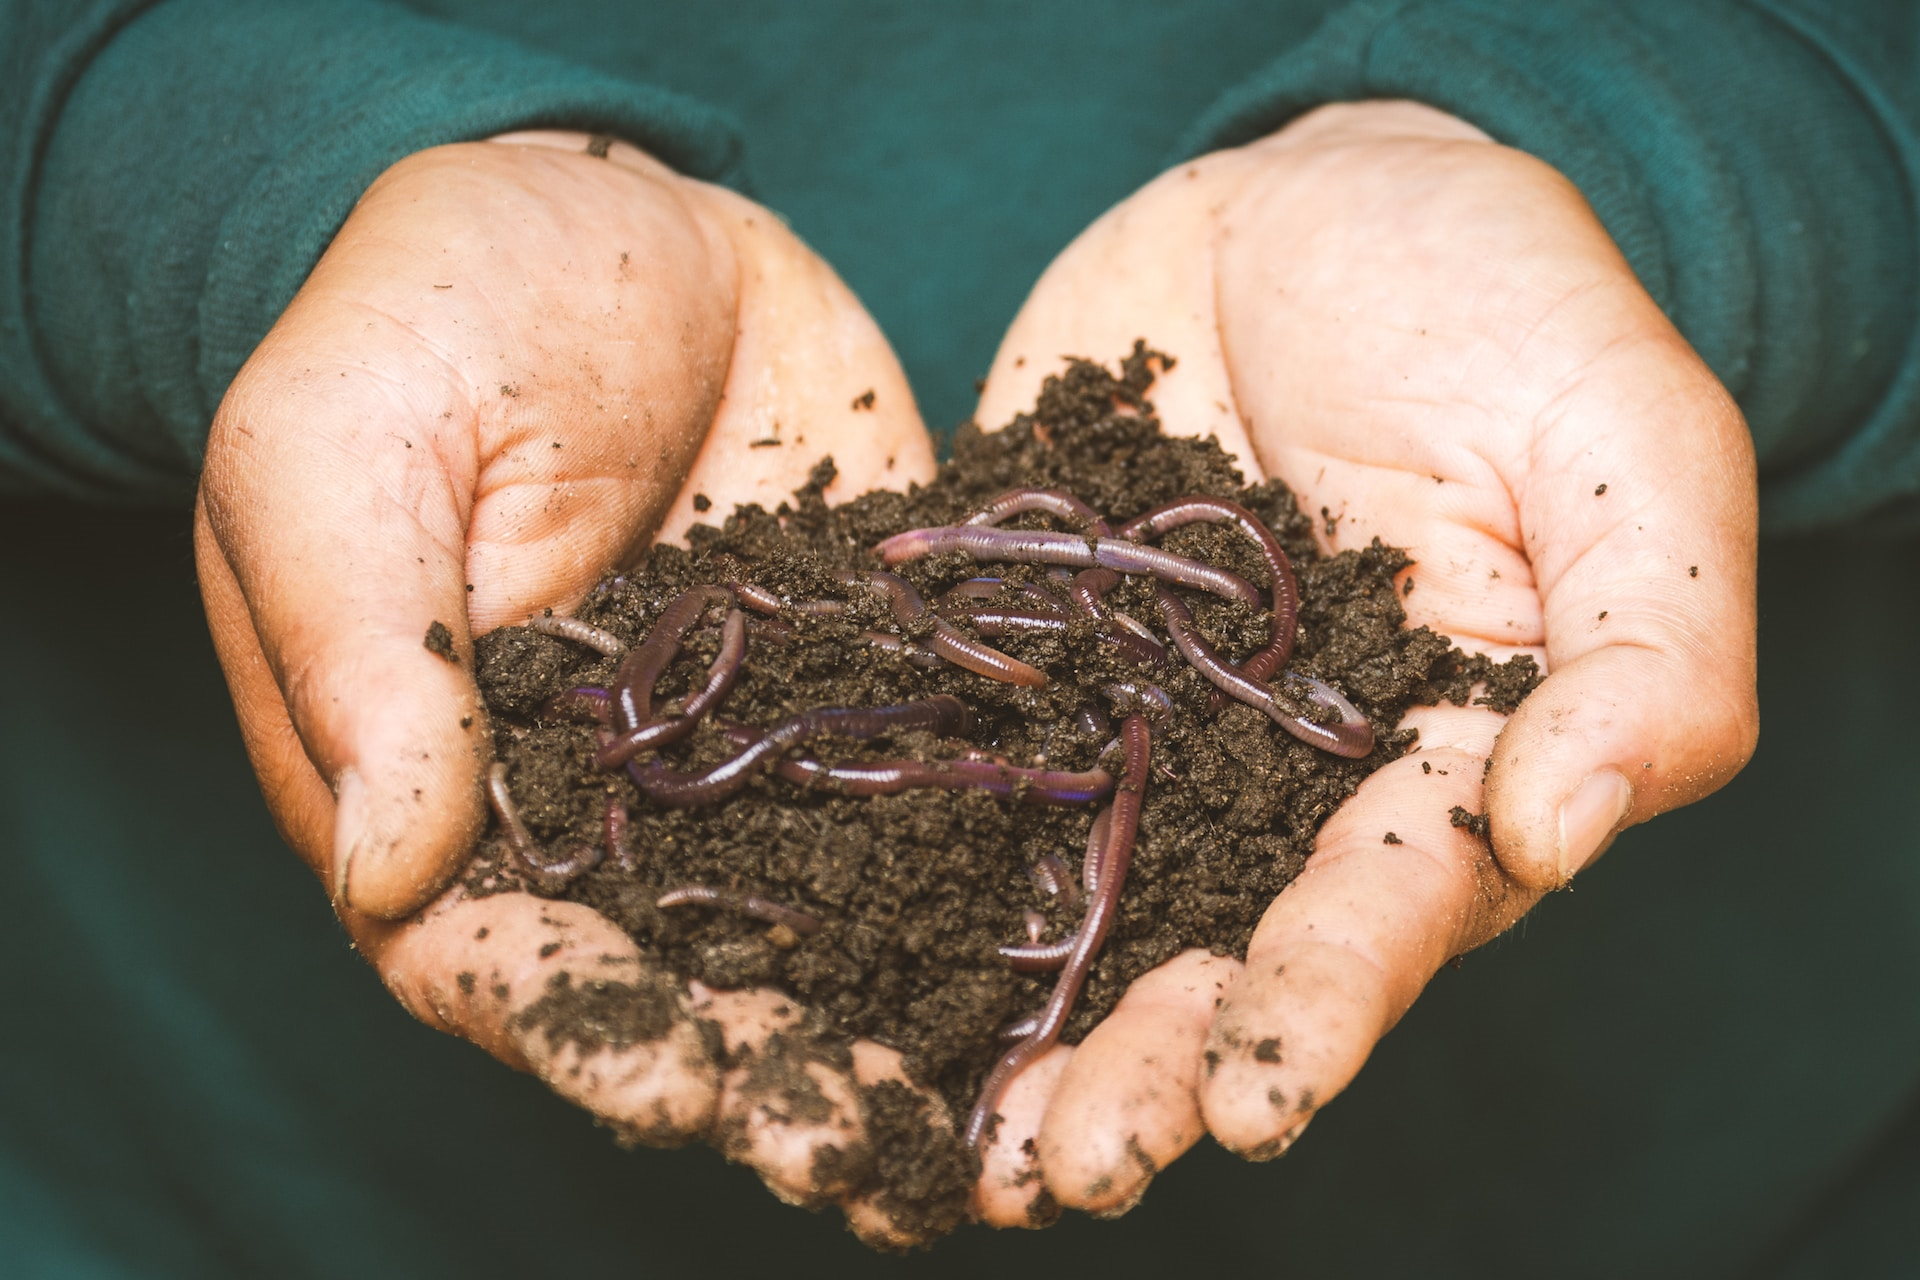 Two hands holding a pile of soil and worms.